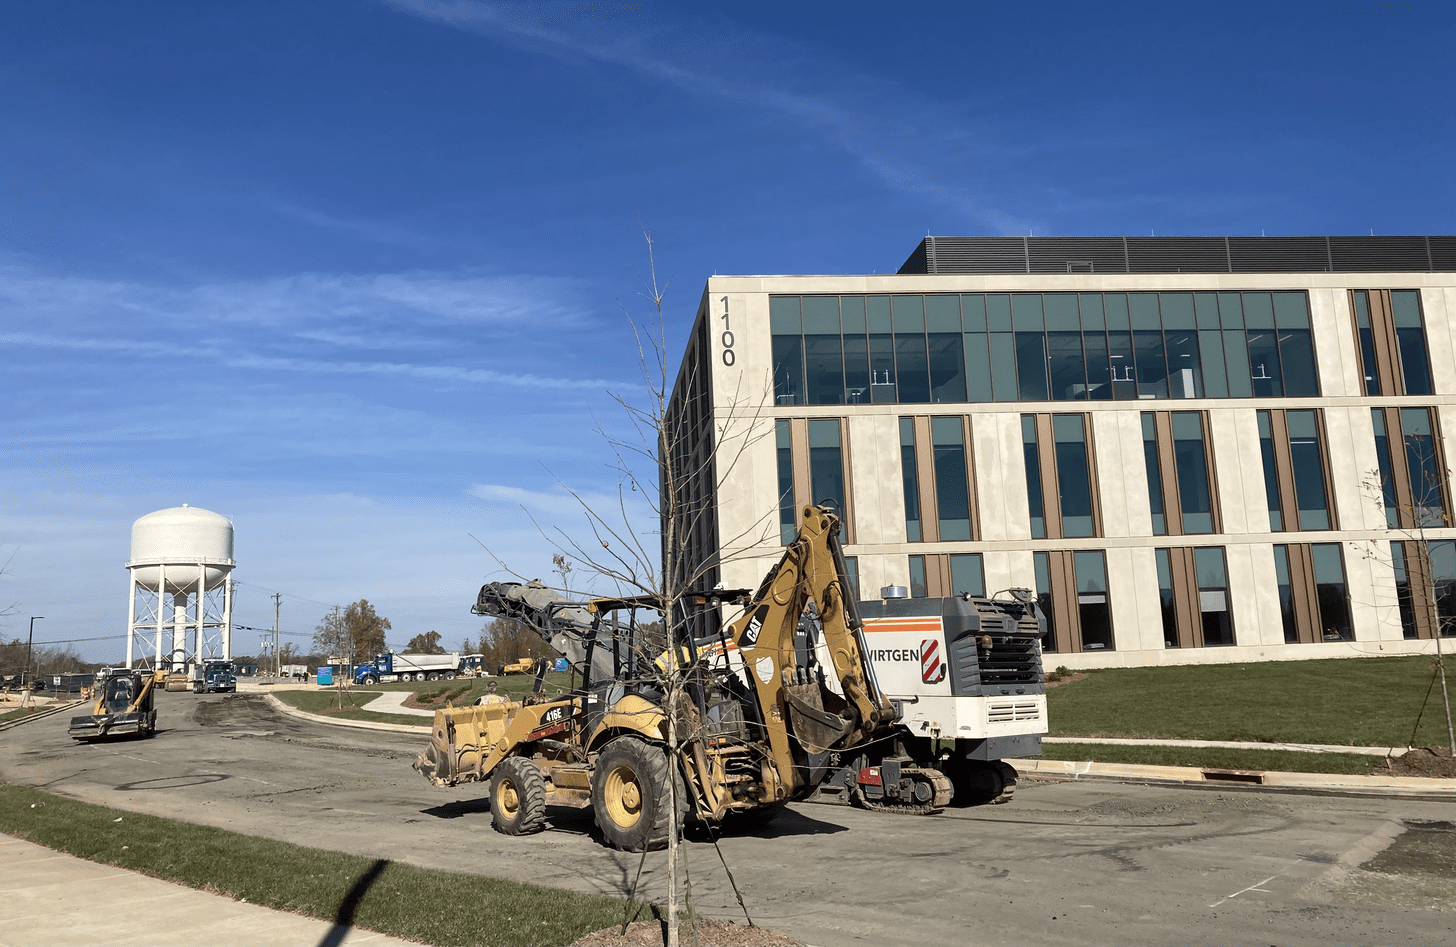 Construction equipment in front of a hospital